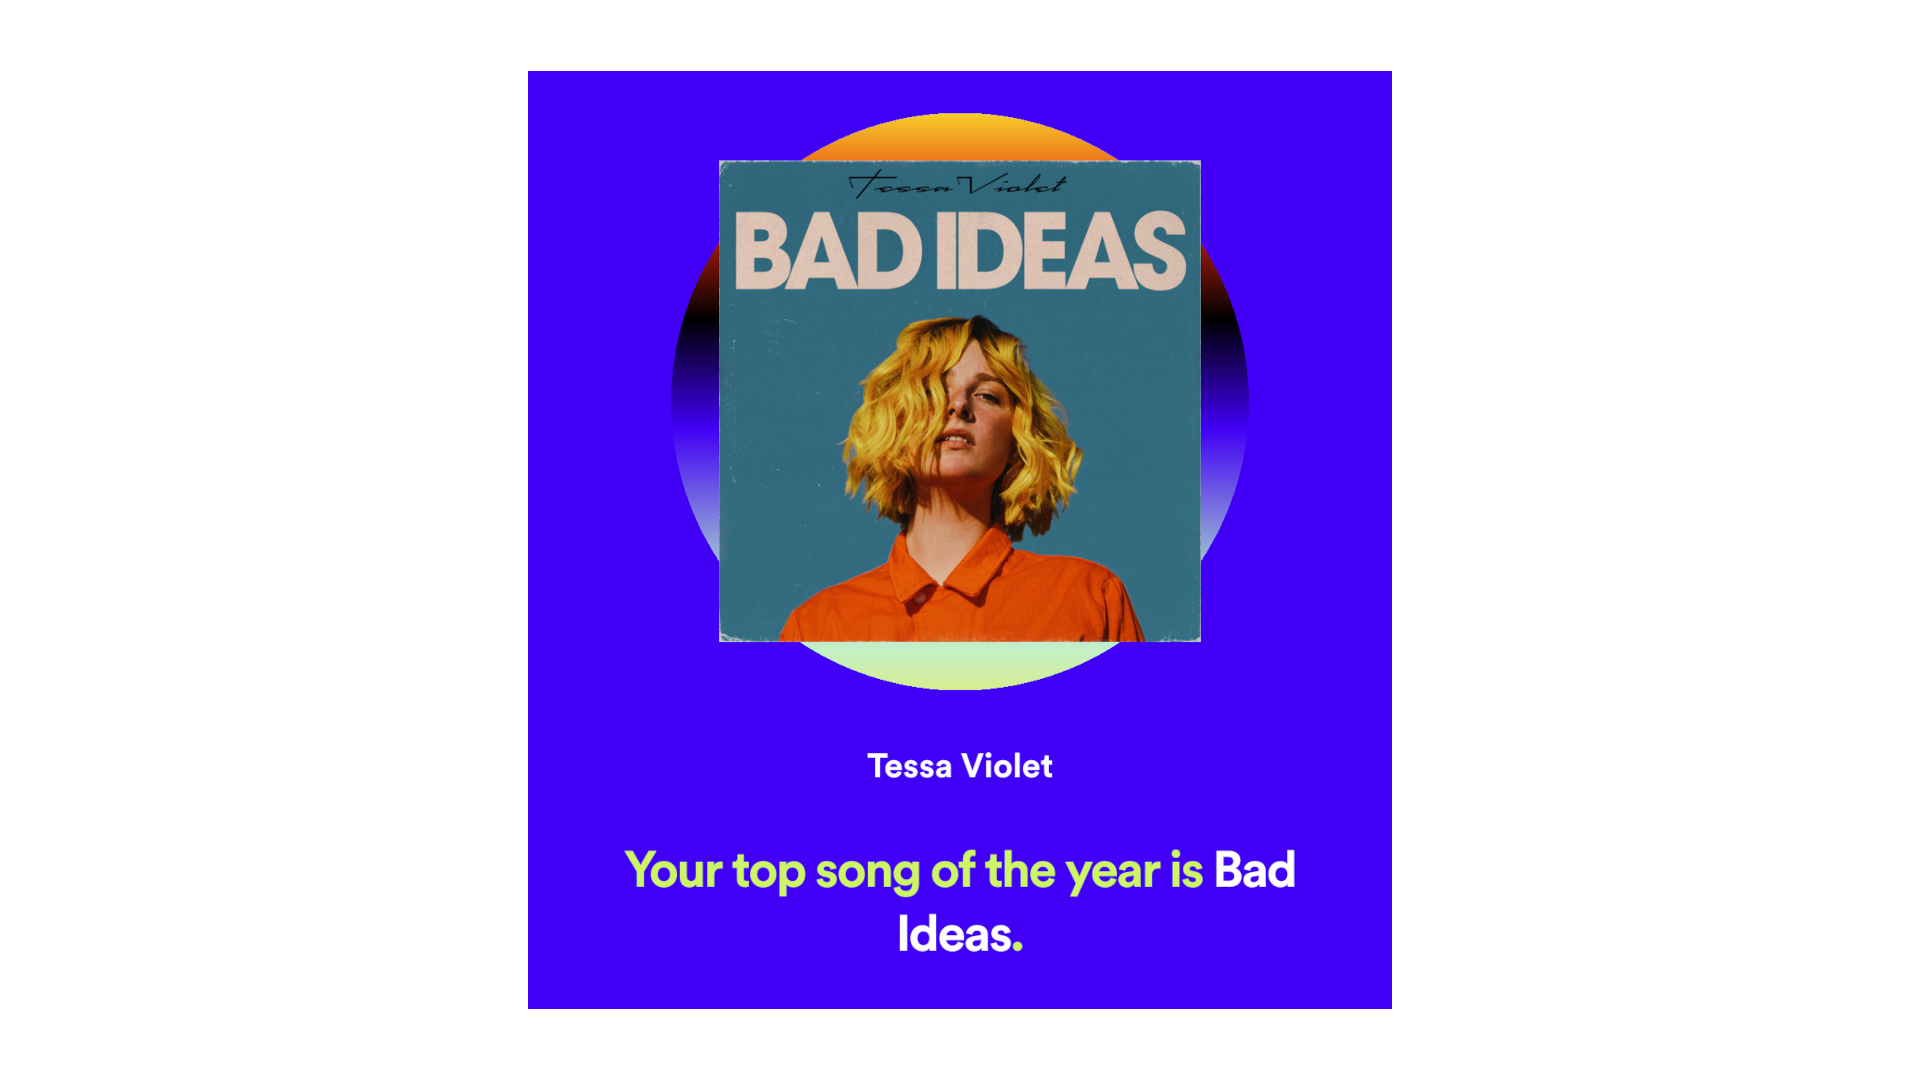 Covering my most played song in 2020 (Bad Ideas – Tessa Violet)